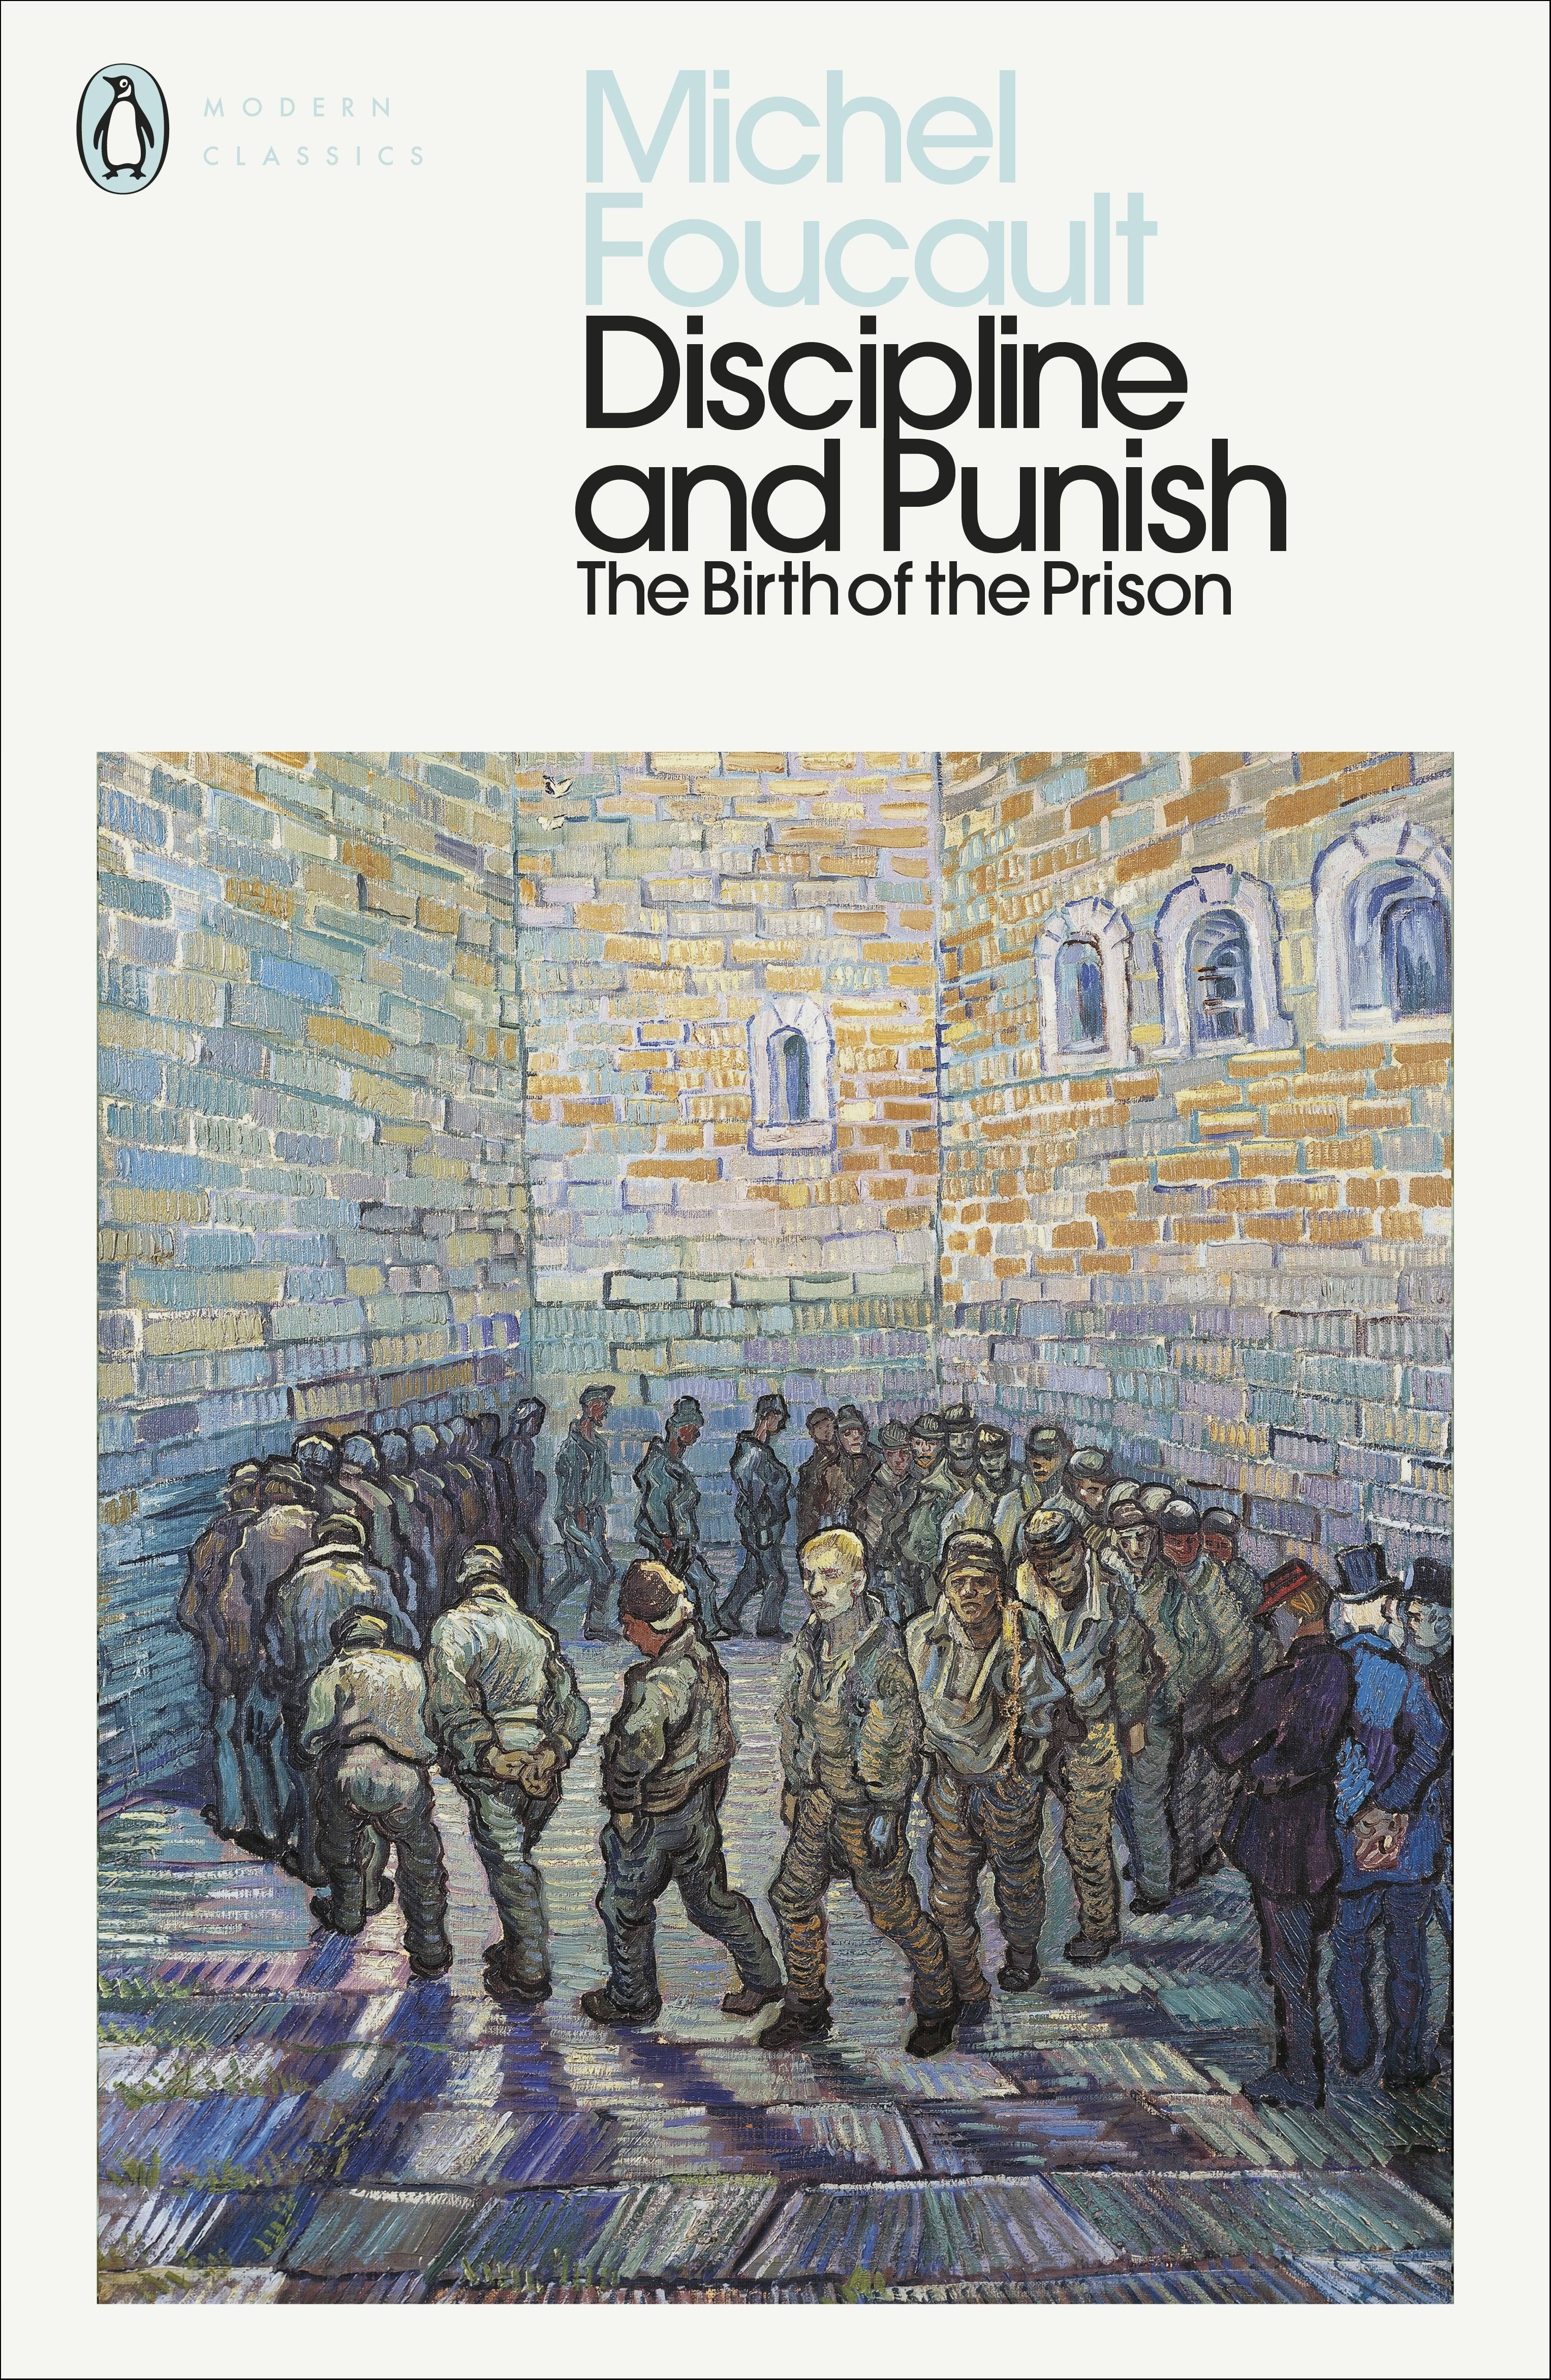 Discipline and Punish - The Birth of The Prison